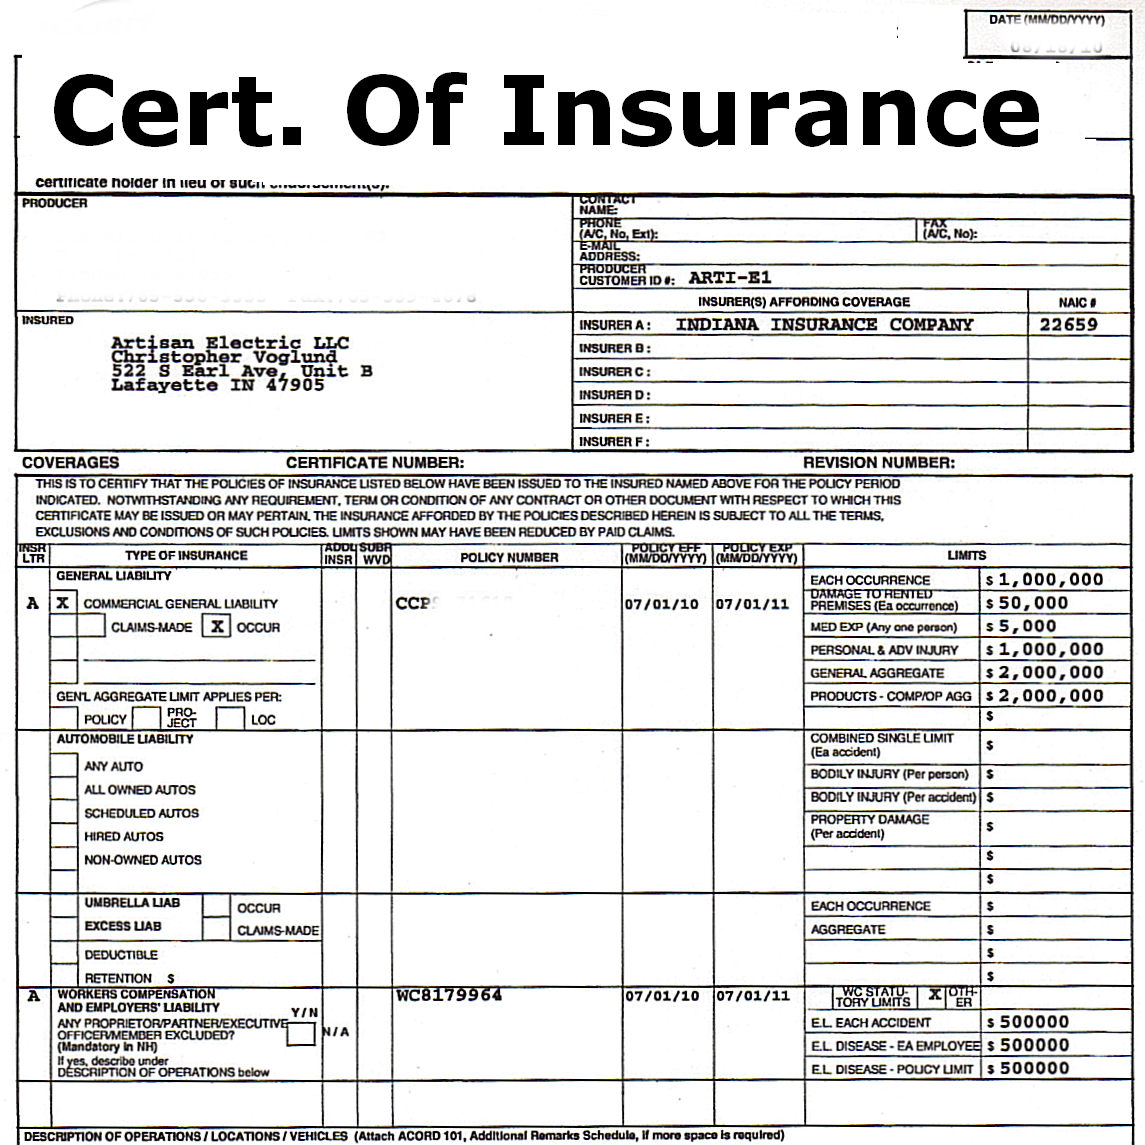 certificate-of-insurance-certificates-templates-free